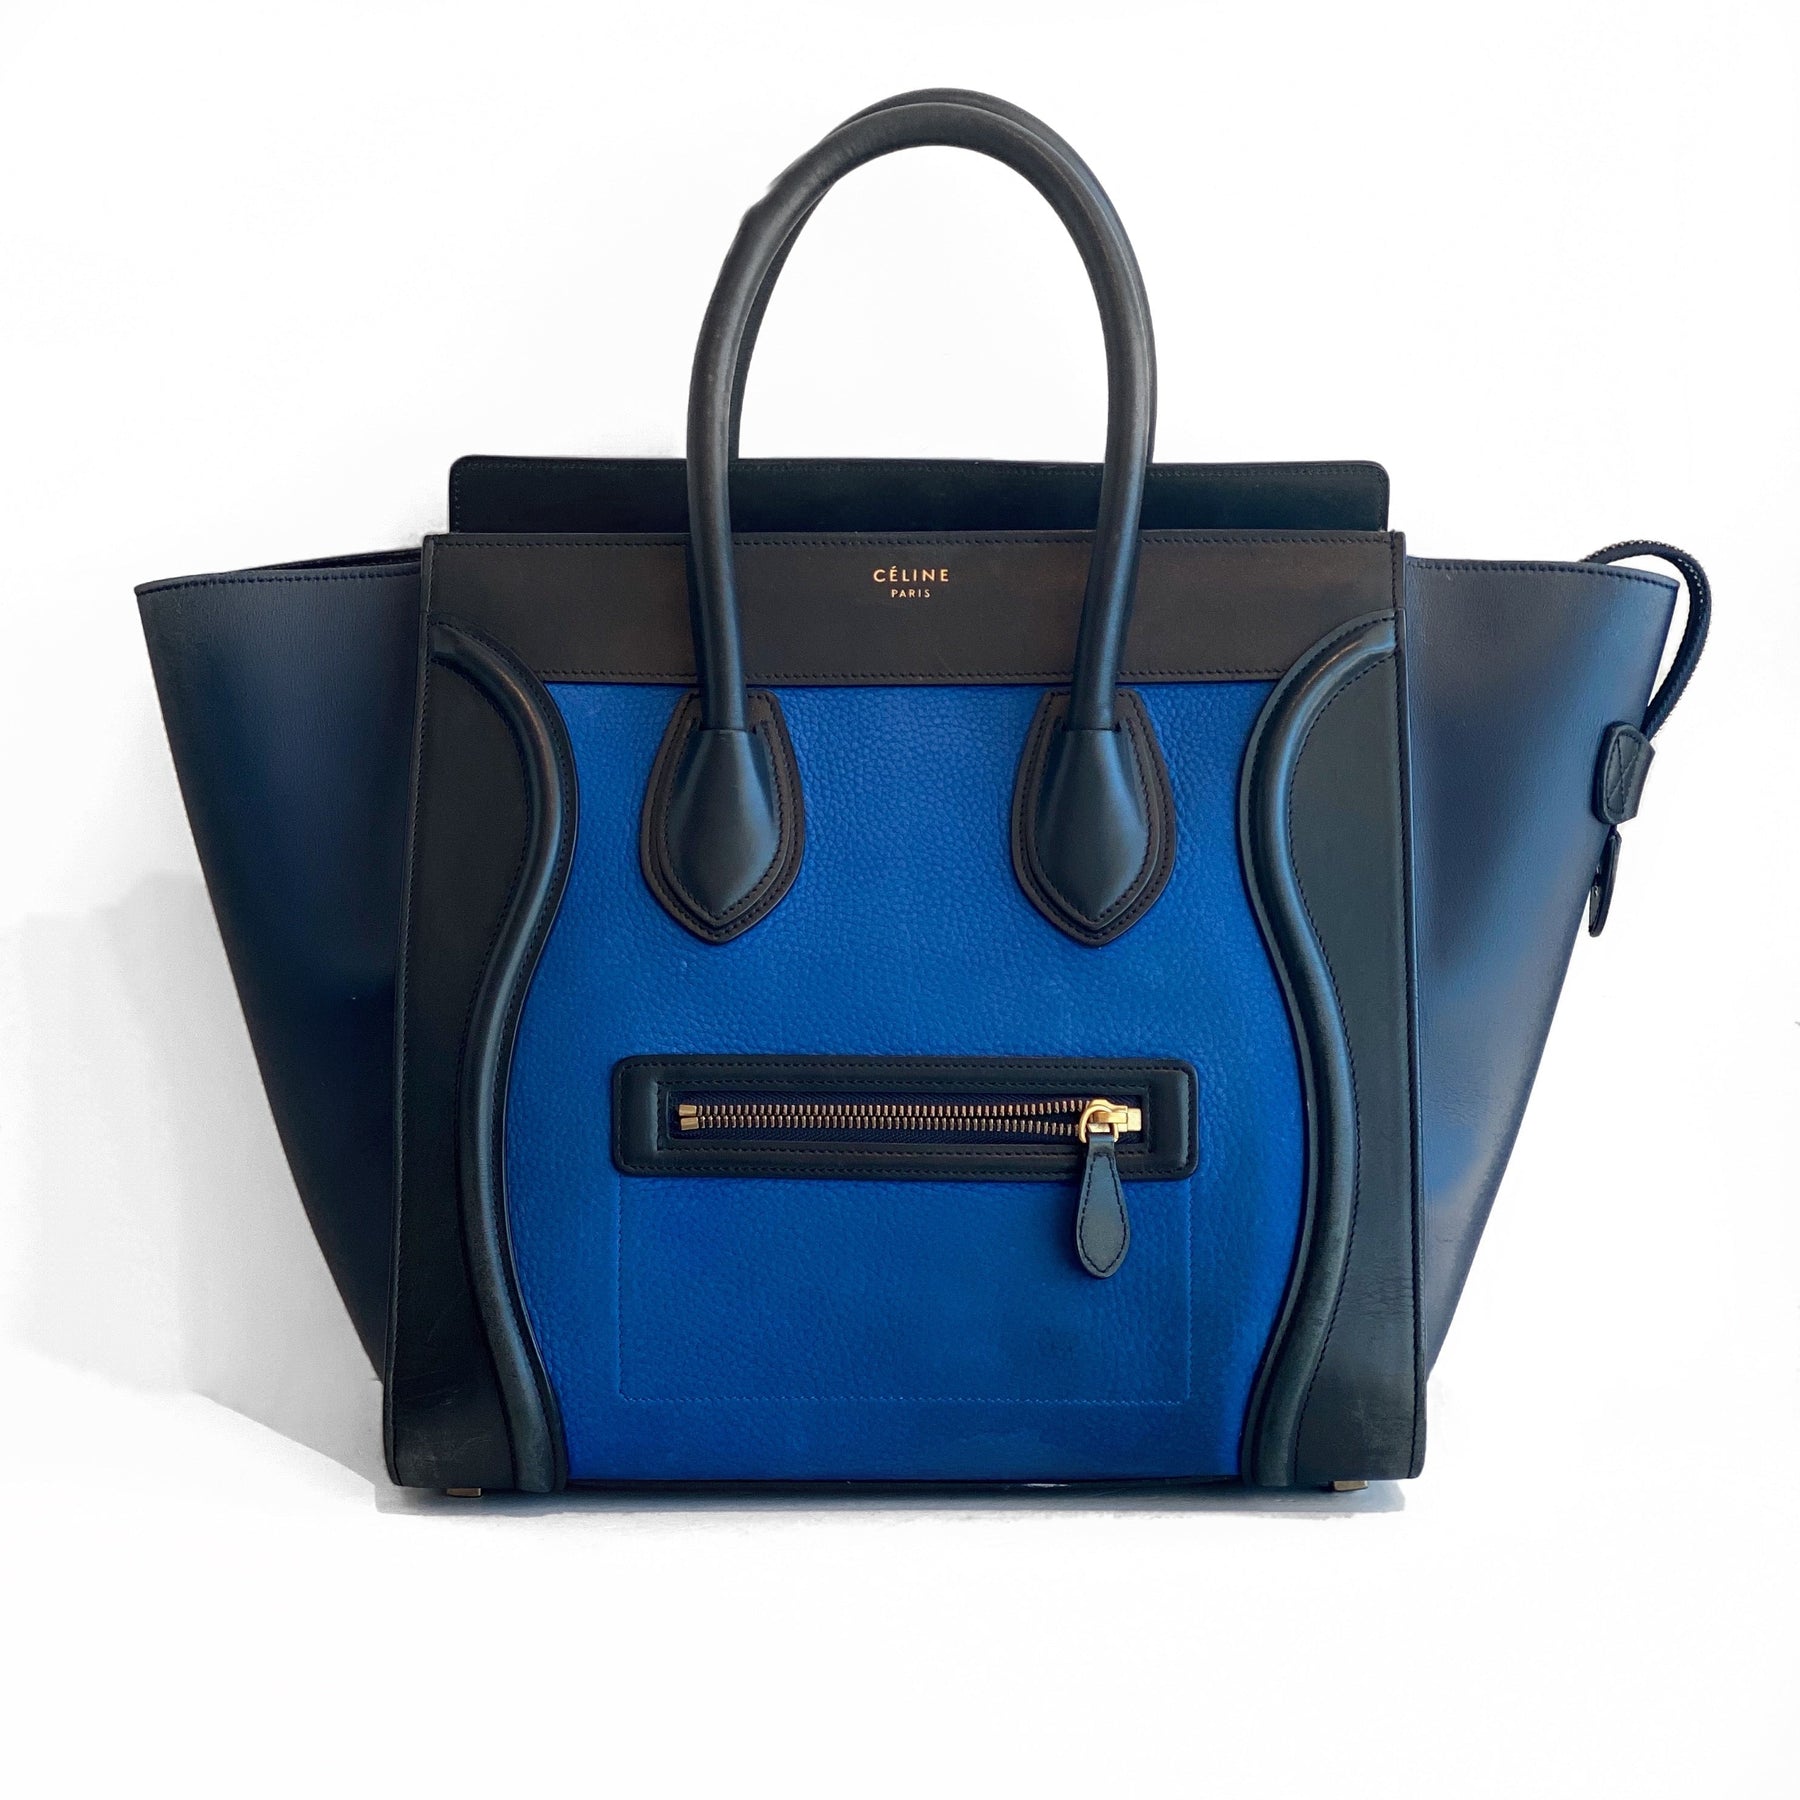 Celine Luggage Tote Mini Black and Blue Front of Bag